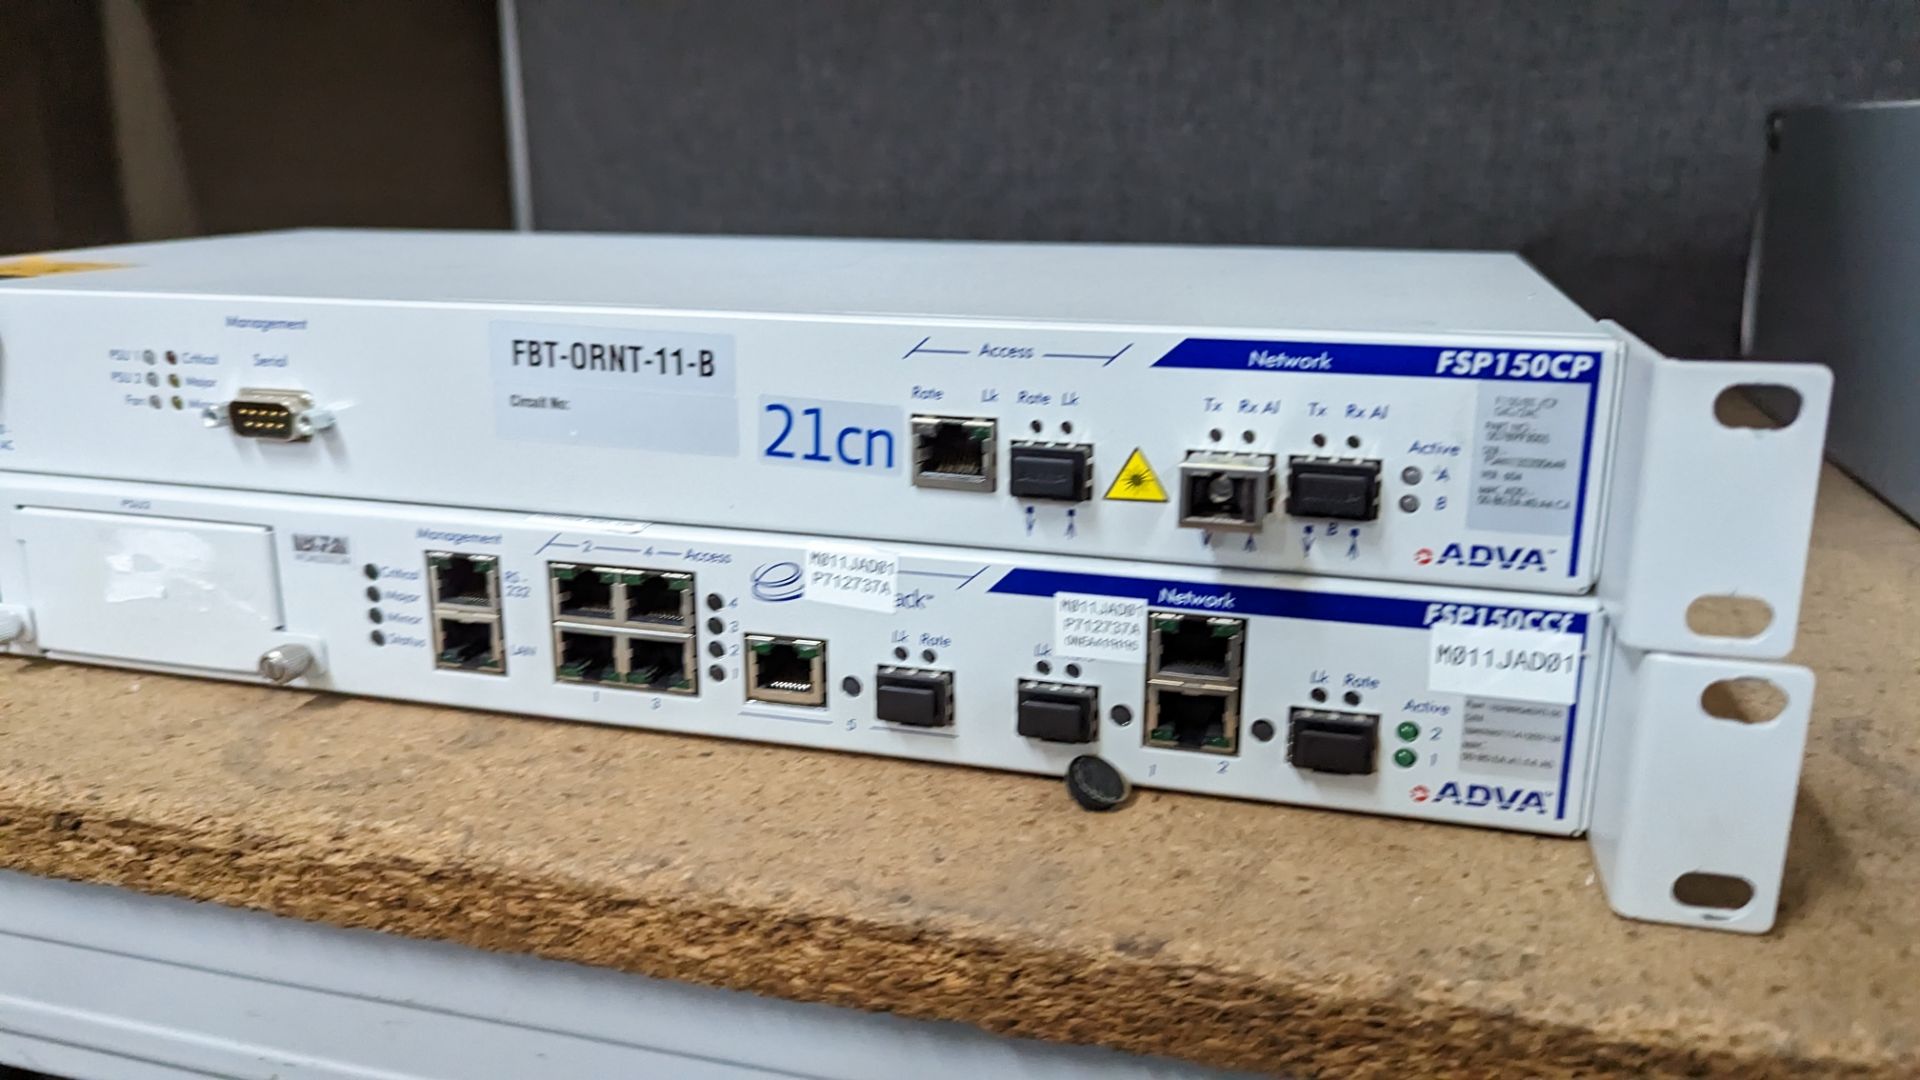 2 off Adva telephonic/networking rack mountable units, models FSP150CP & FSP150CCF - Image 4 of 9